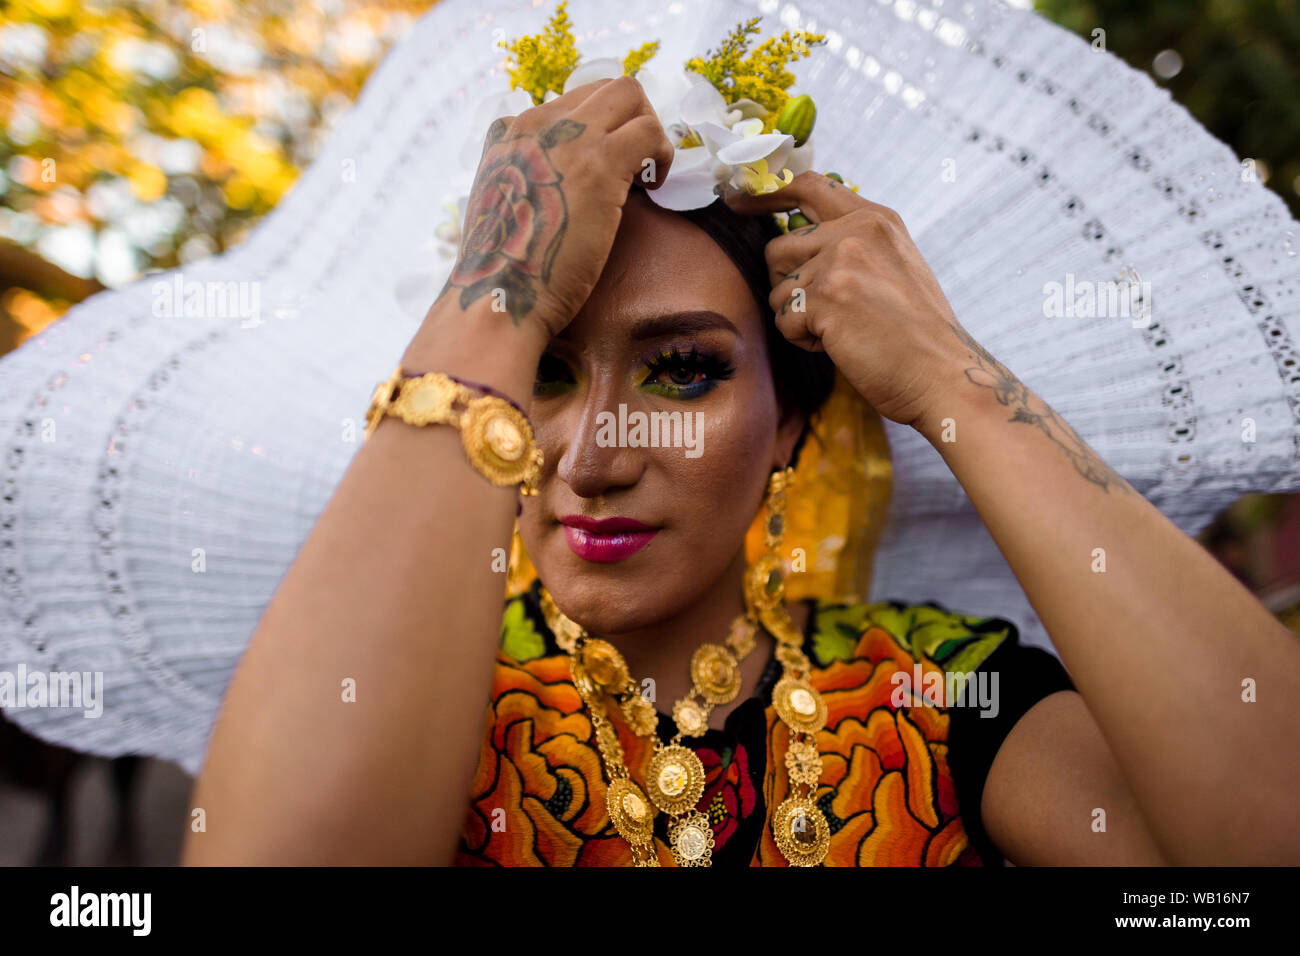 A Mexican “muxe” (typically, a homosexual man wearing female clothes) adjusts a headdress during the festival in Juchitán de Zaragoza, Mexico. Stock Photo